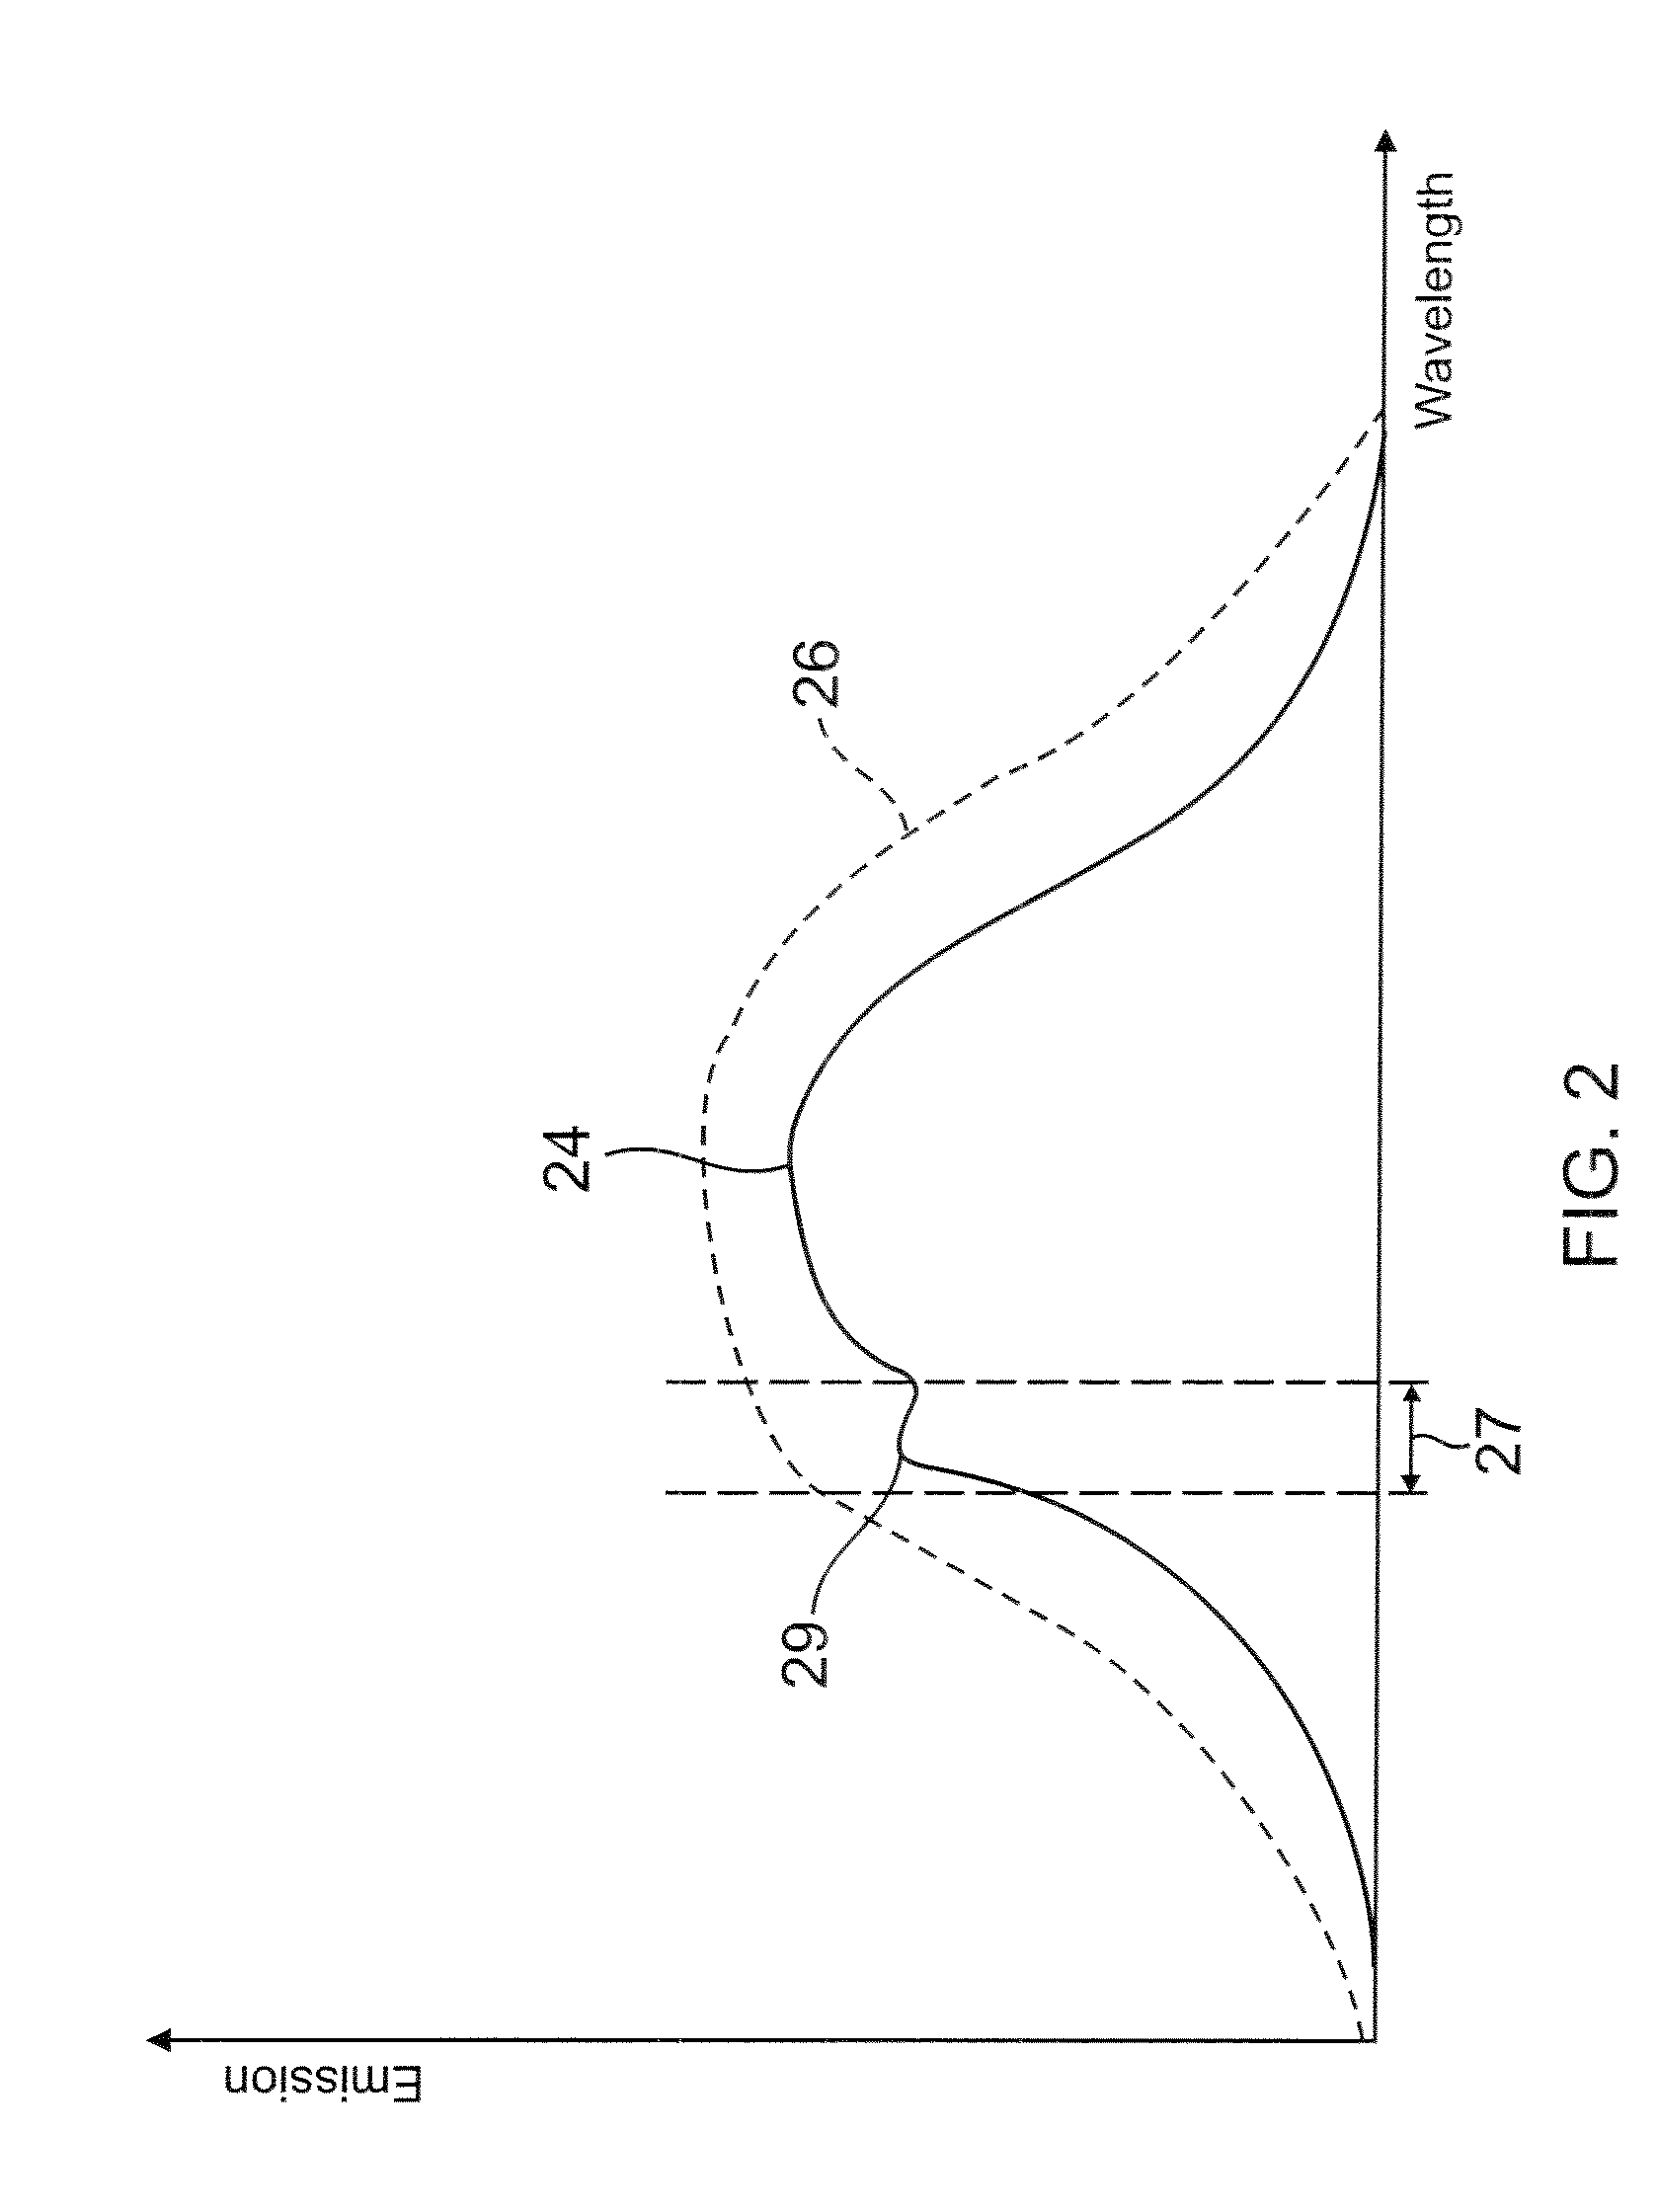 Apparatus and methods for non-invasive measurement of a substance within a body